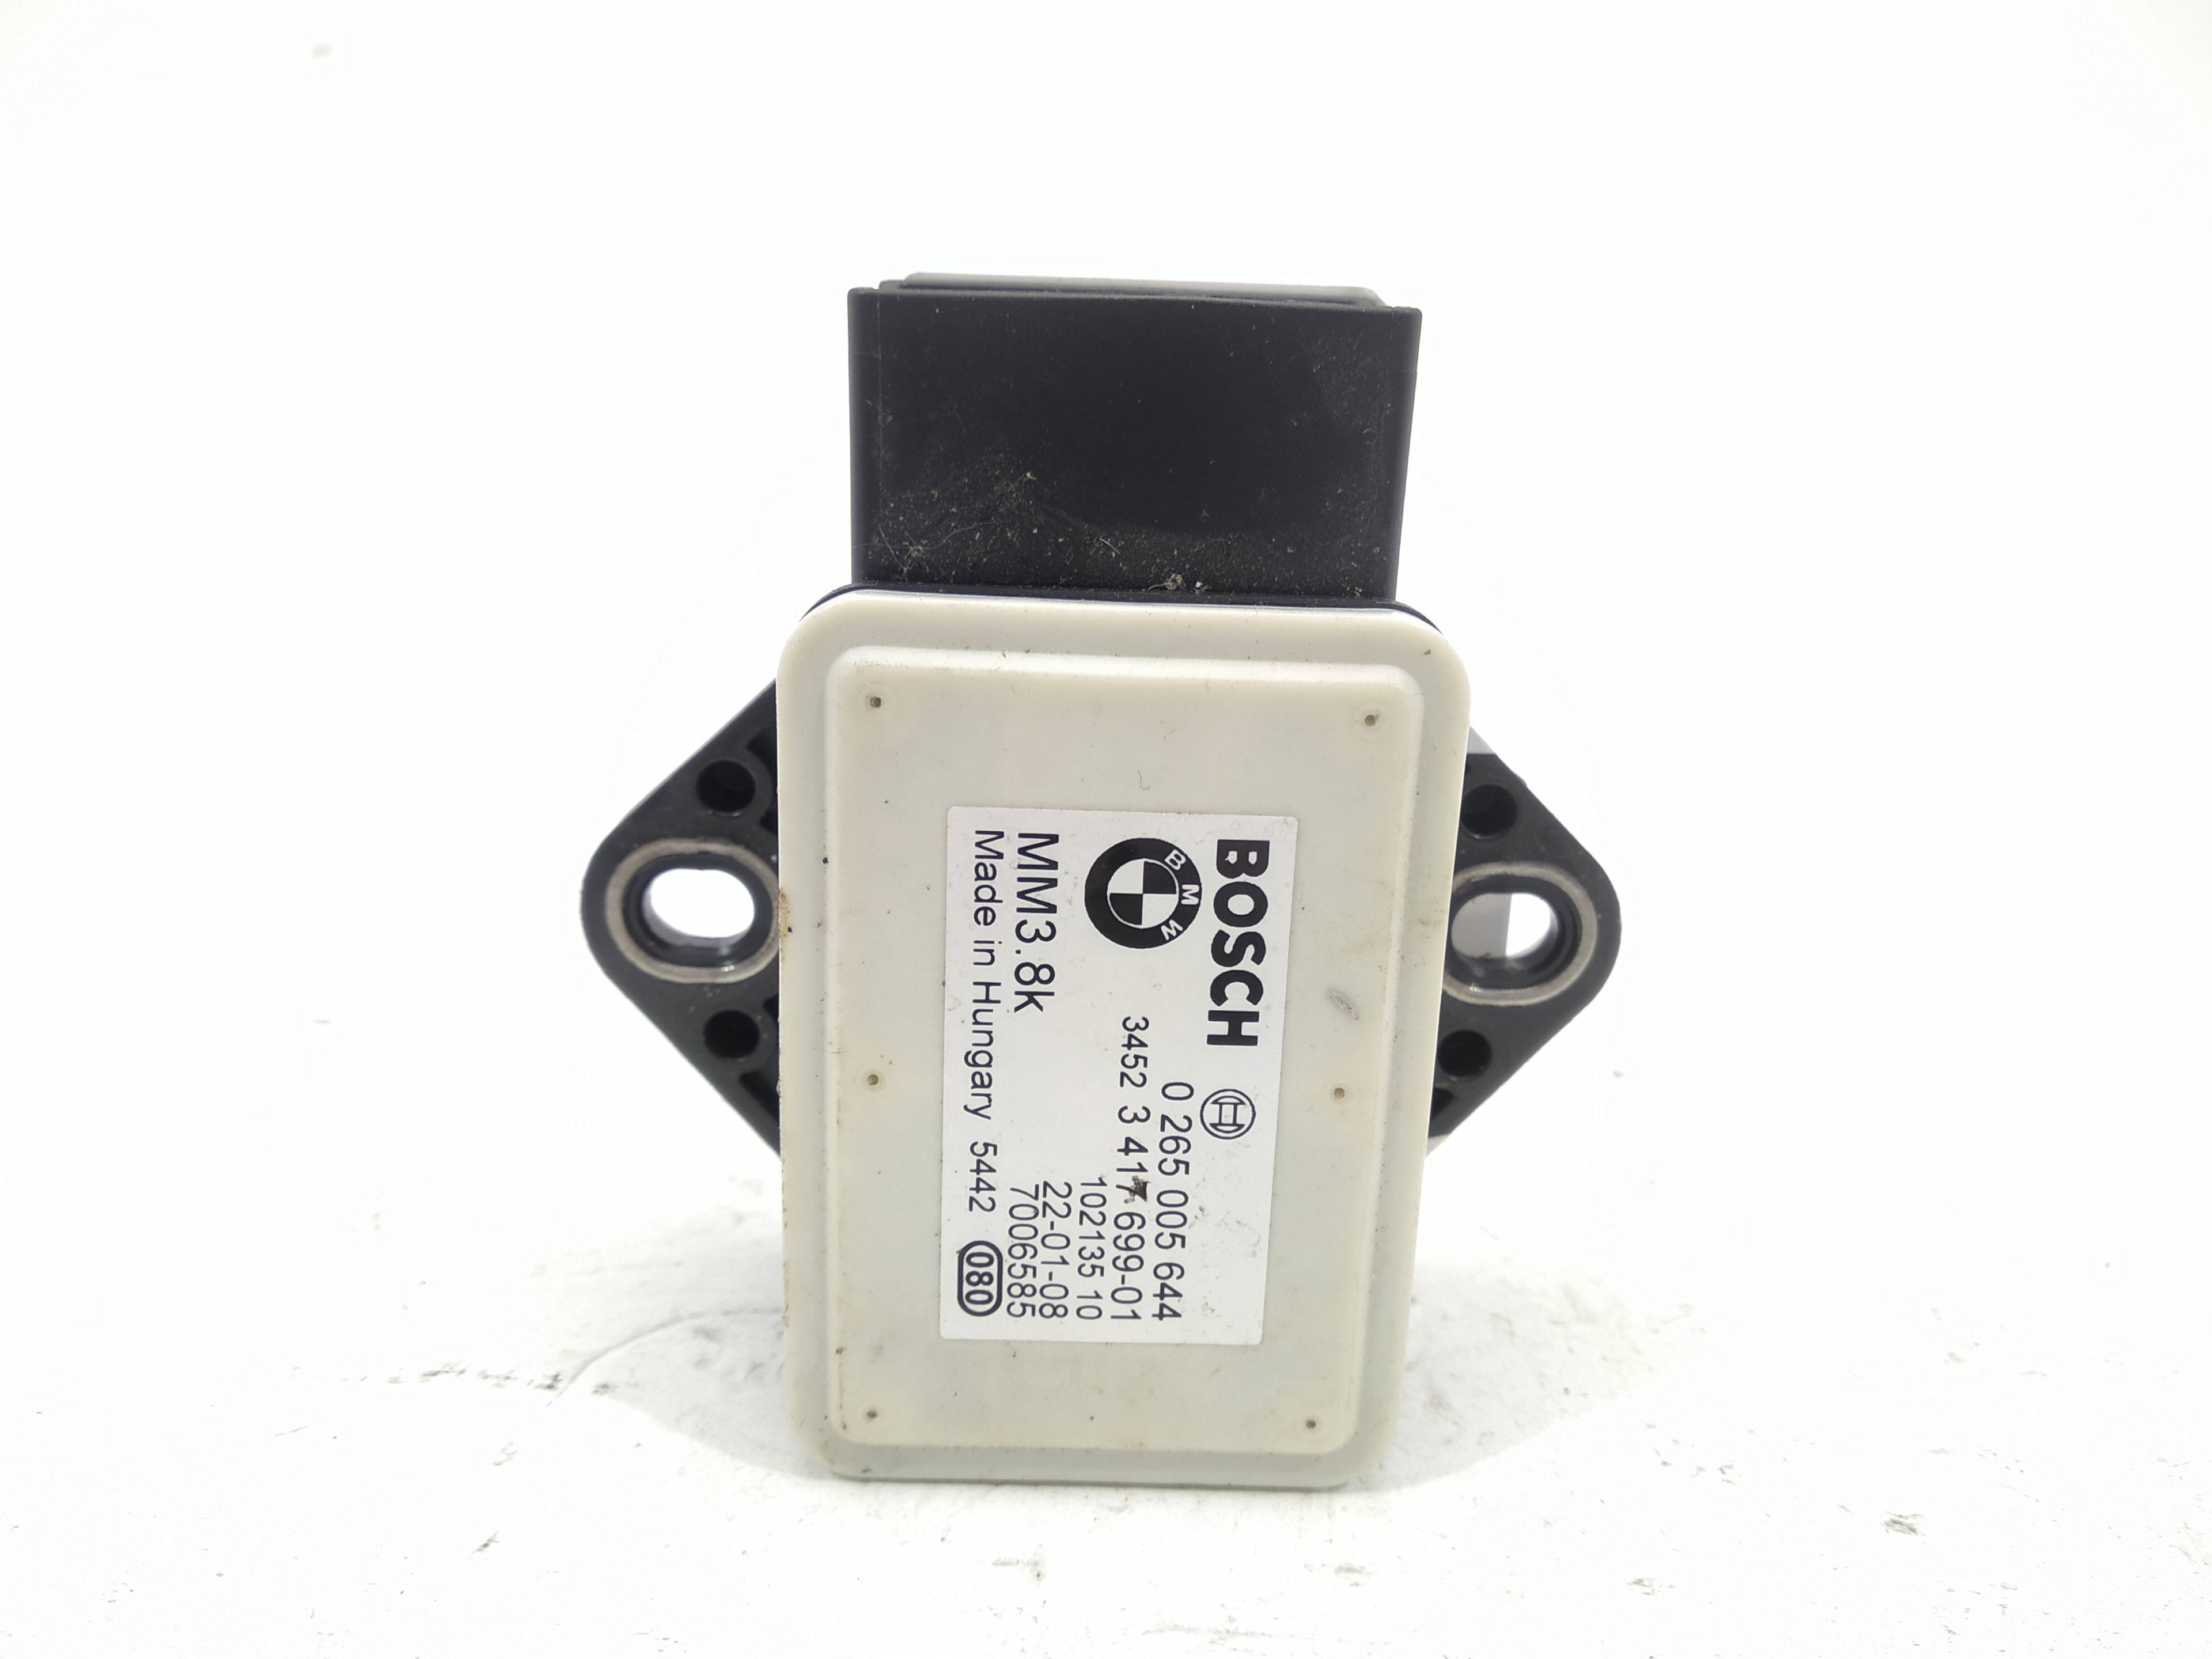 BMW X3 E83 (2003-2010) Other Control Units 0265005644, 0265005644, 0265005644 19324027